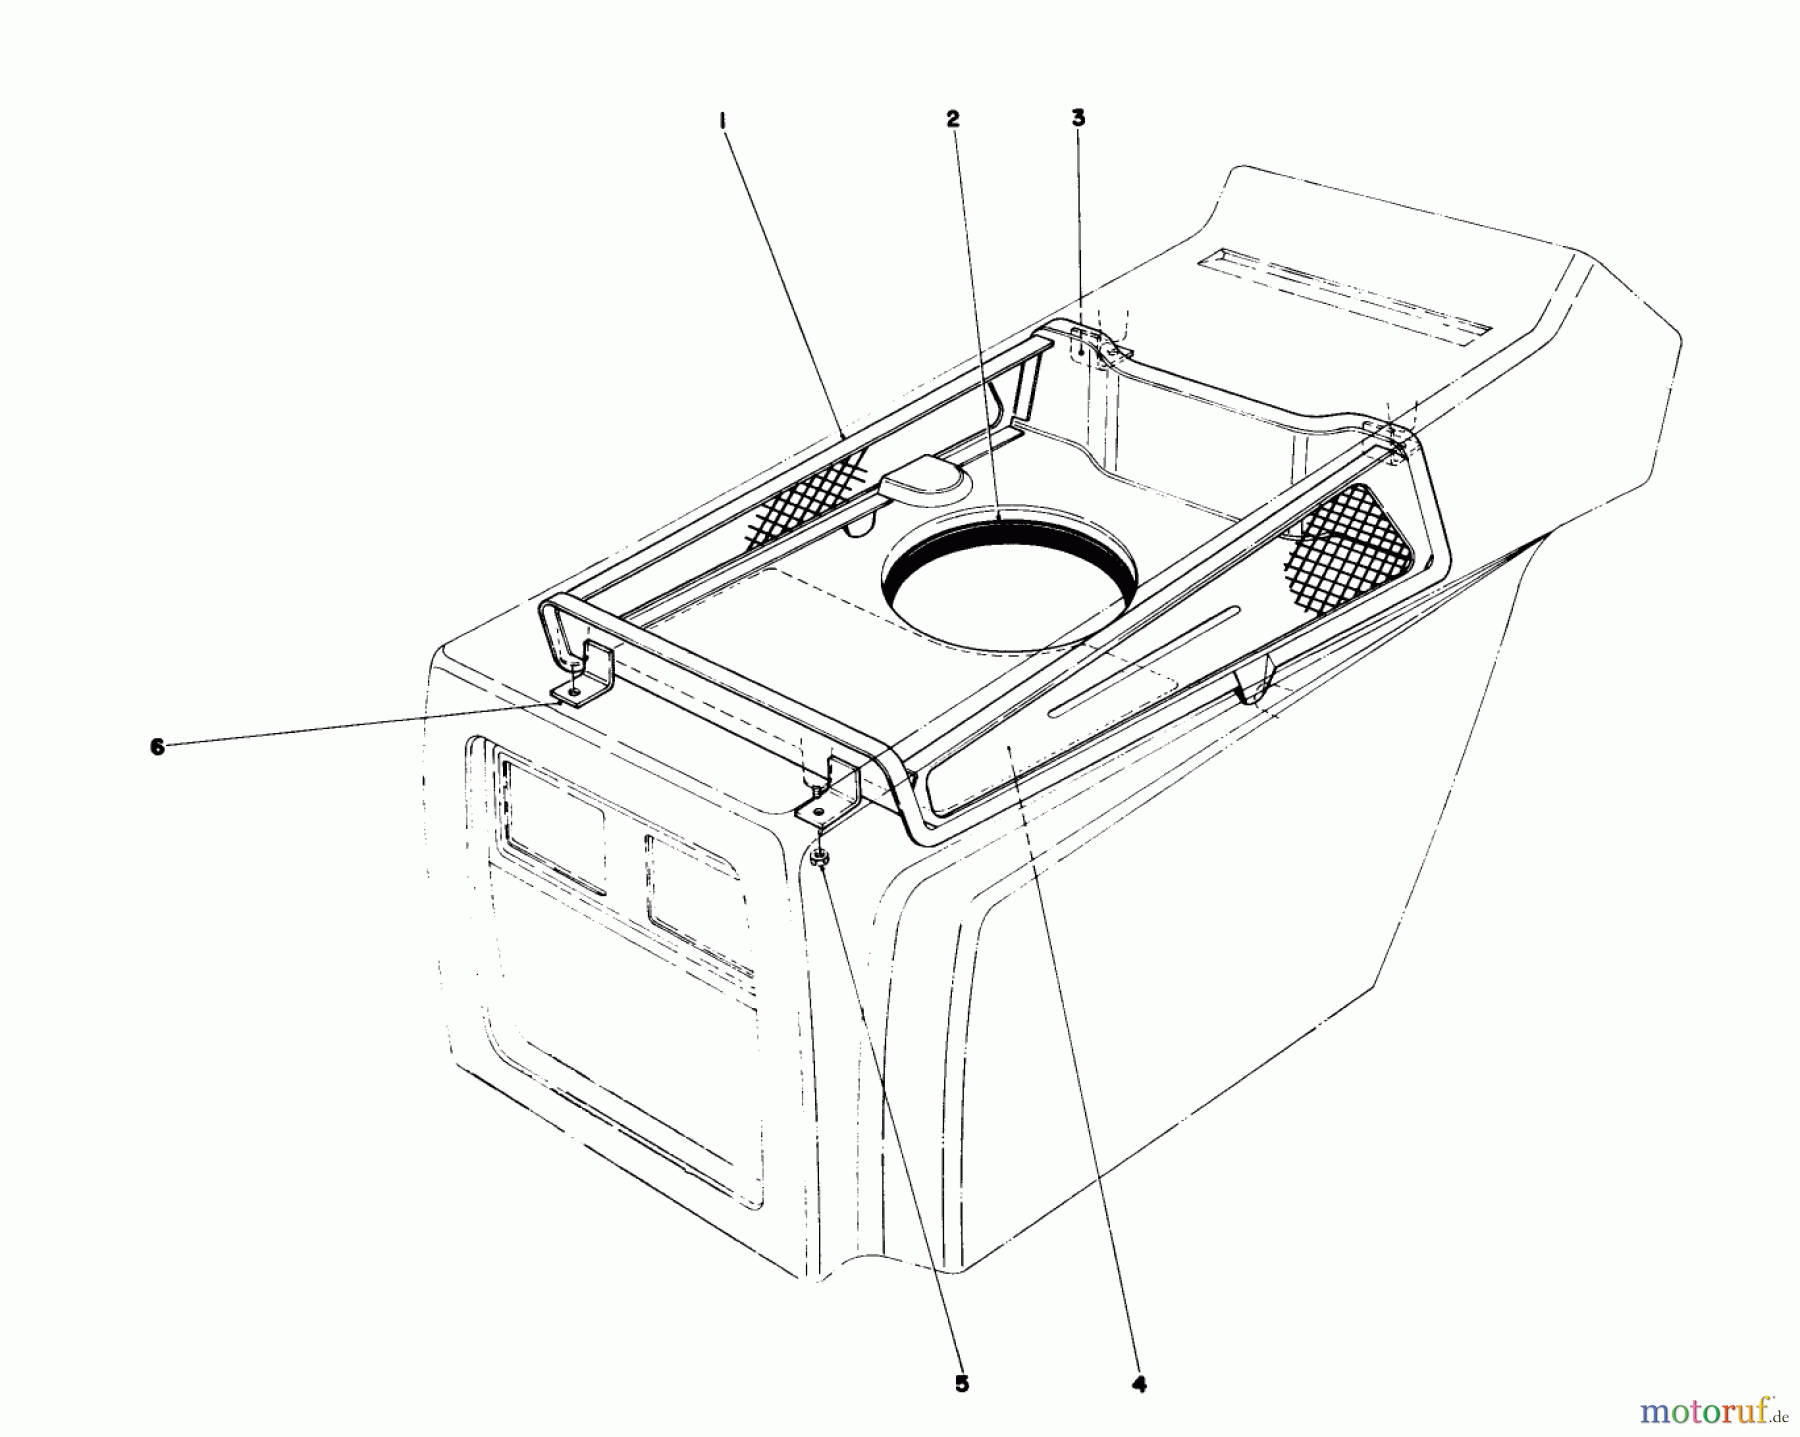  Toro Neu Mowers, Lawn & Garden Tractor Seite 1 57357 (11-44) - Toro 11-44 Lawn Tractor, 1985 (5000001-5999999) HOOD DUCT ASSEMBLY